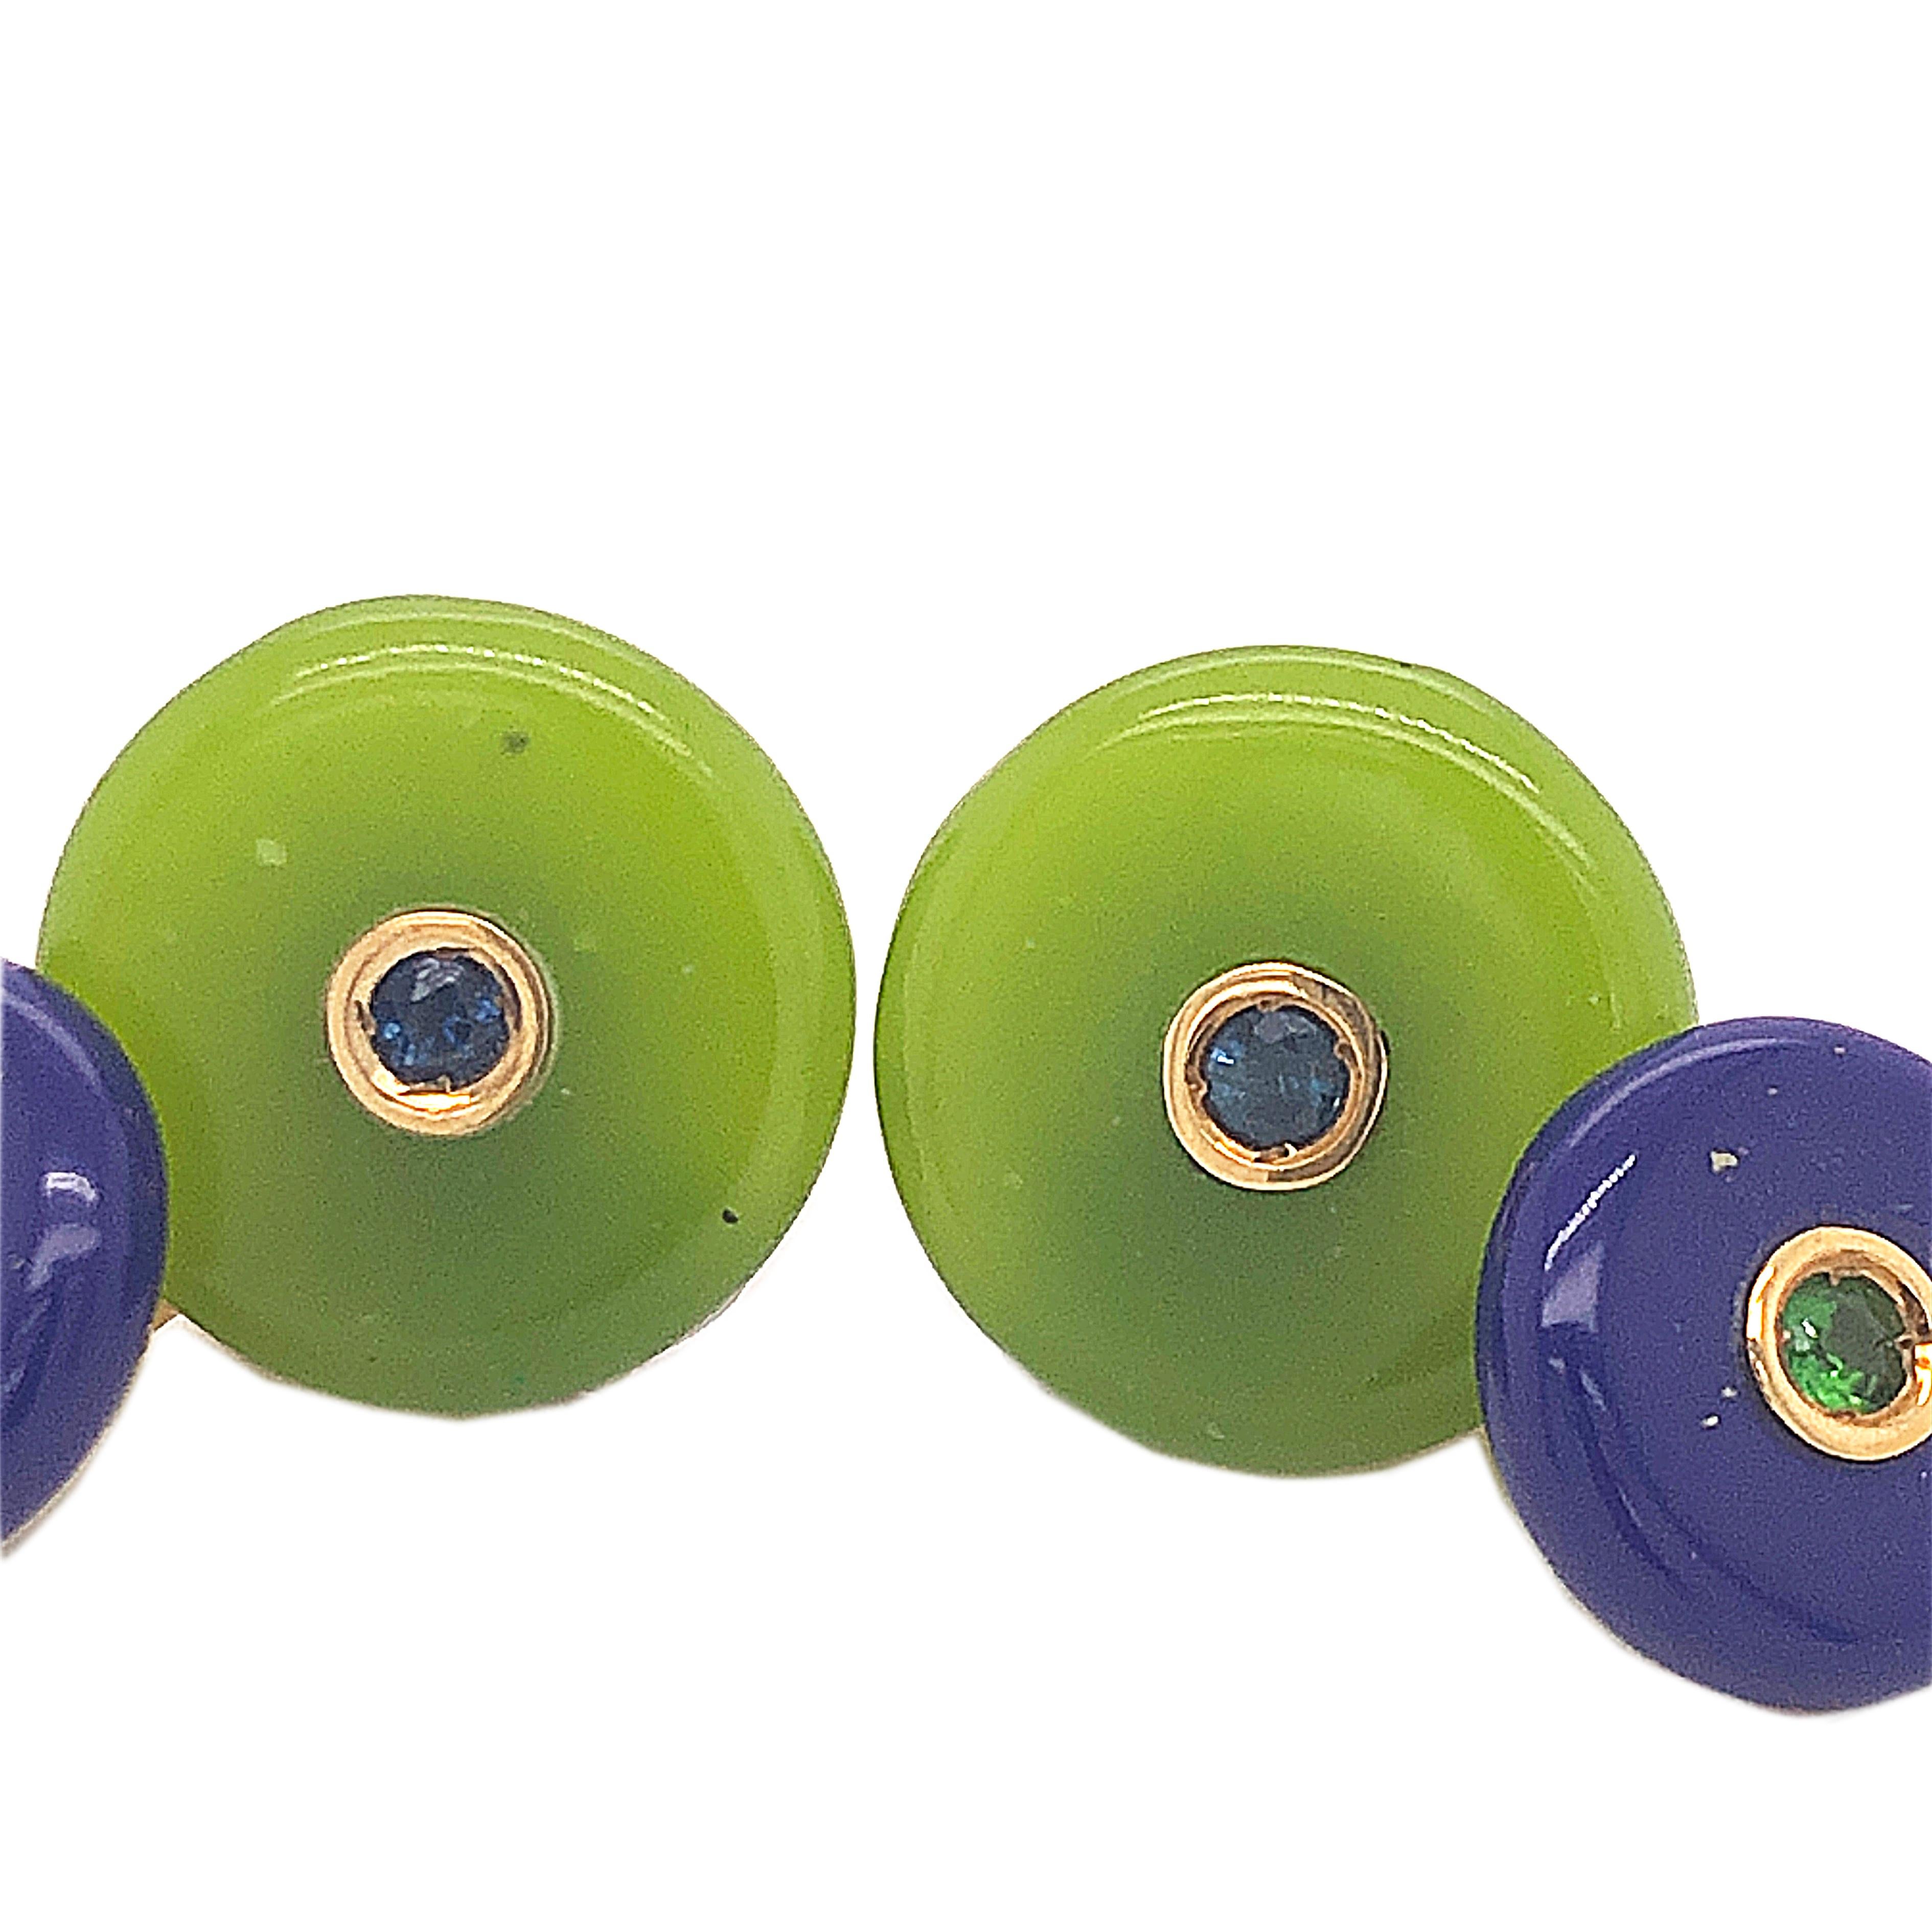 Contemporary Berca Emerald Sapphire in a Jade Lapis-Lazuli Disk Yellow Gold Setting Cufflinks For Sale